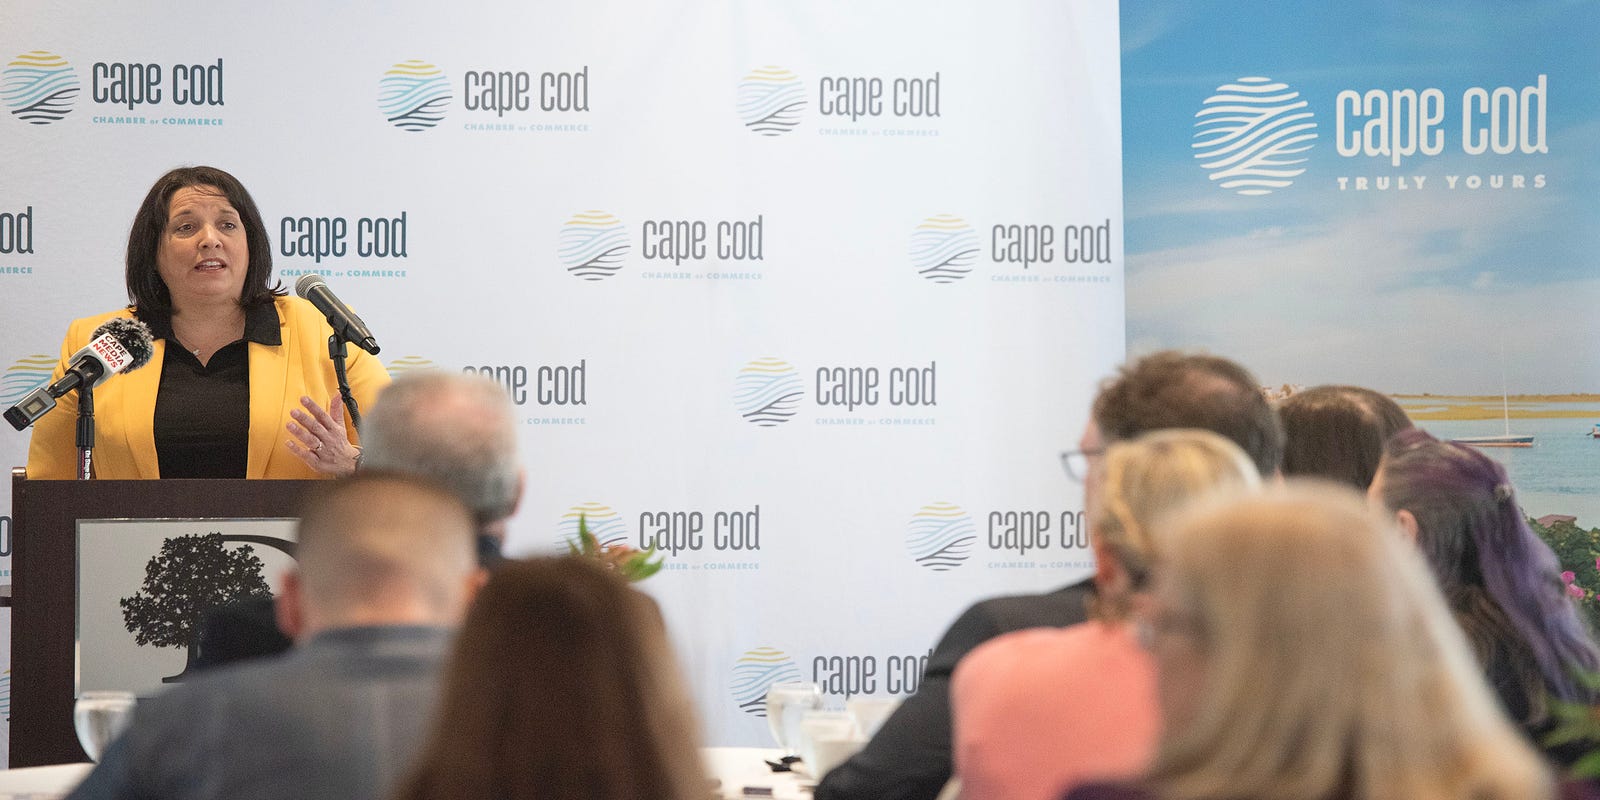 Tourism website, marketing, grants to fuel Cape's tourism economy, state officials say